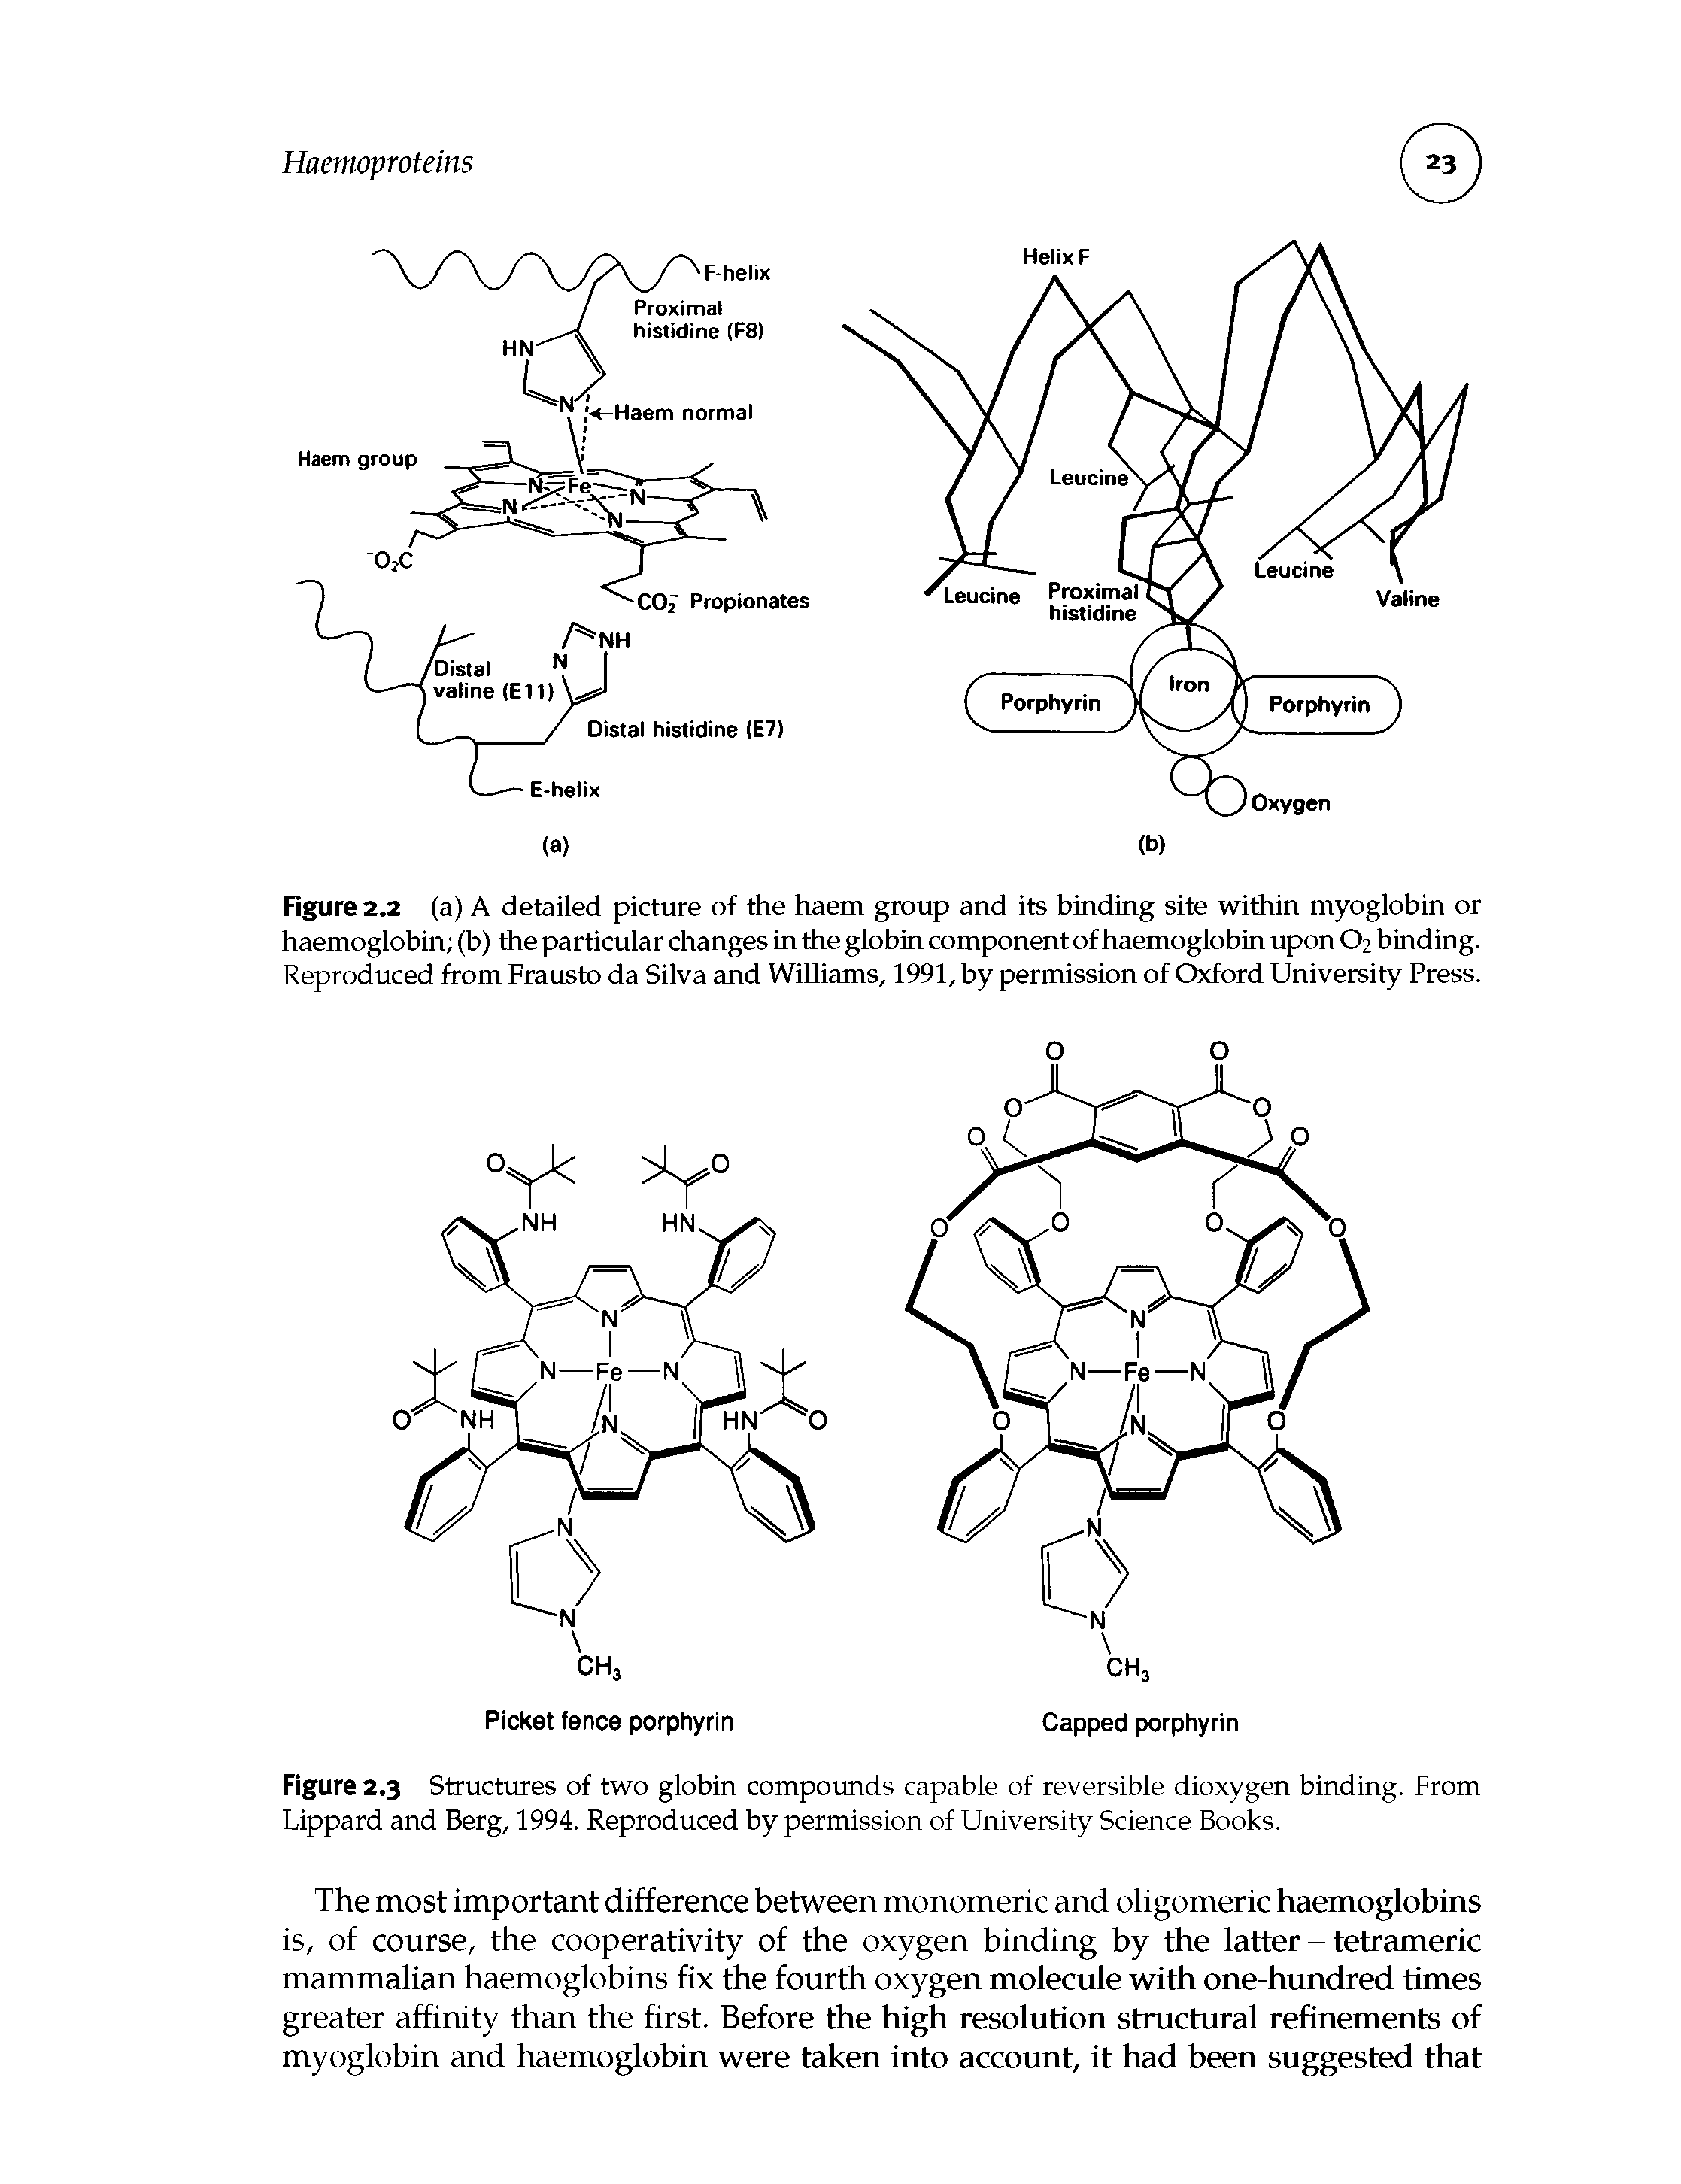 Figure 2.3 Structures of two globin compounds capable of reversible dioxygen binding. From Lippard and Berg, 1994. Reproduced by permission of University Science Books.